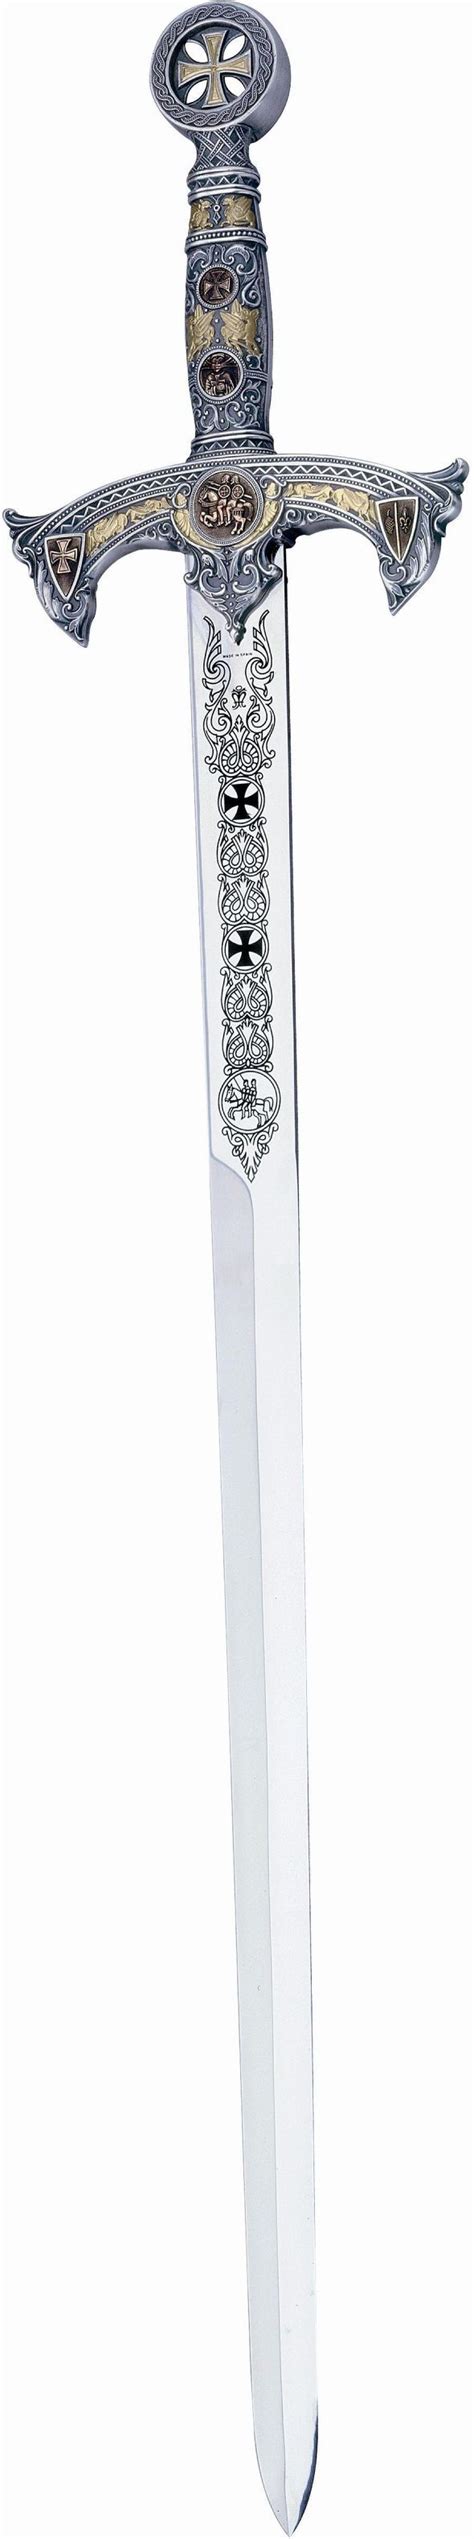 Deluxe Medieval Templar Knight Swords By Marto Of Spain Best Deals On